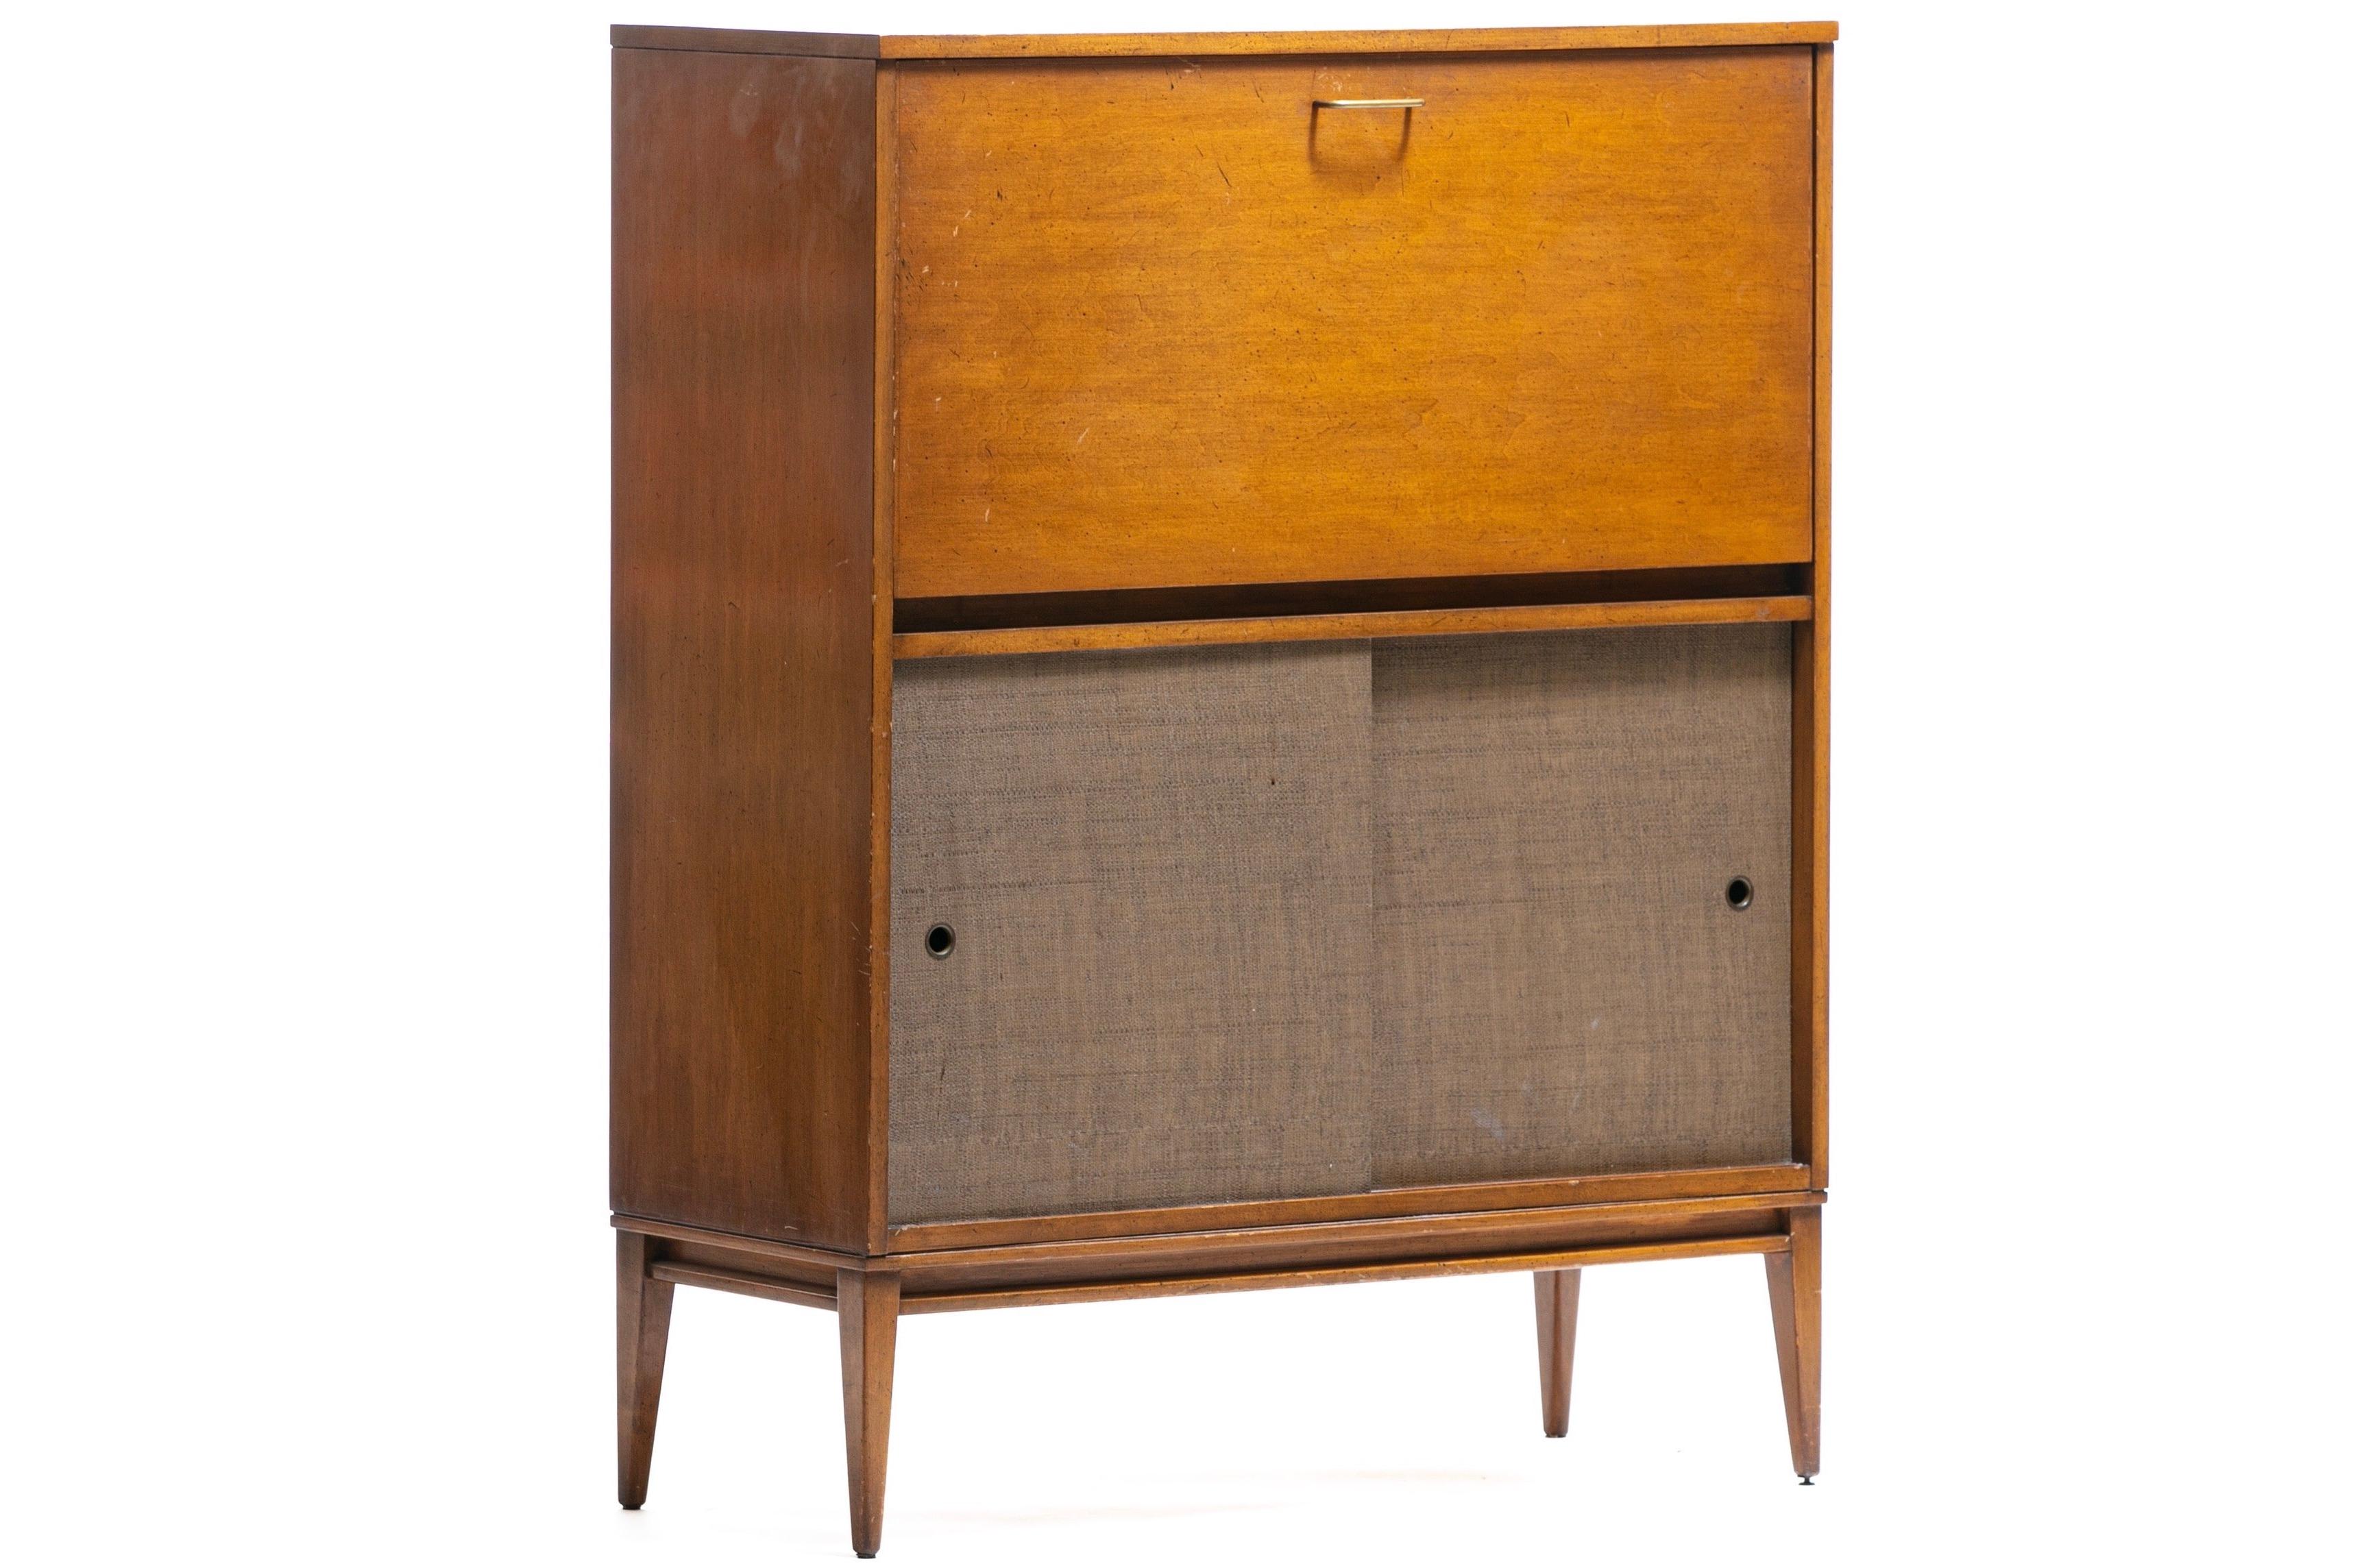 Famed Mid-Century Modern Designer Paul McCobb is celebrated for his unique ability to combine sleek design with common sense functionality and this 1950s Paul McCobb secretary desk designed for Winchendon Furniture Company exemplifies just that - a